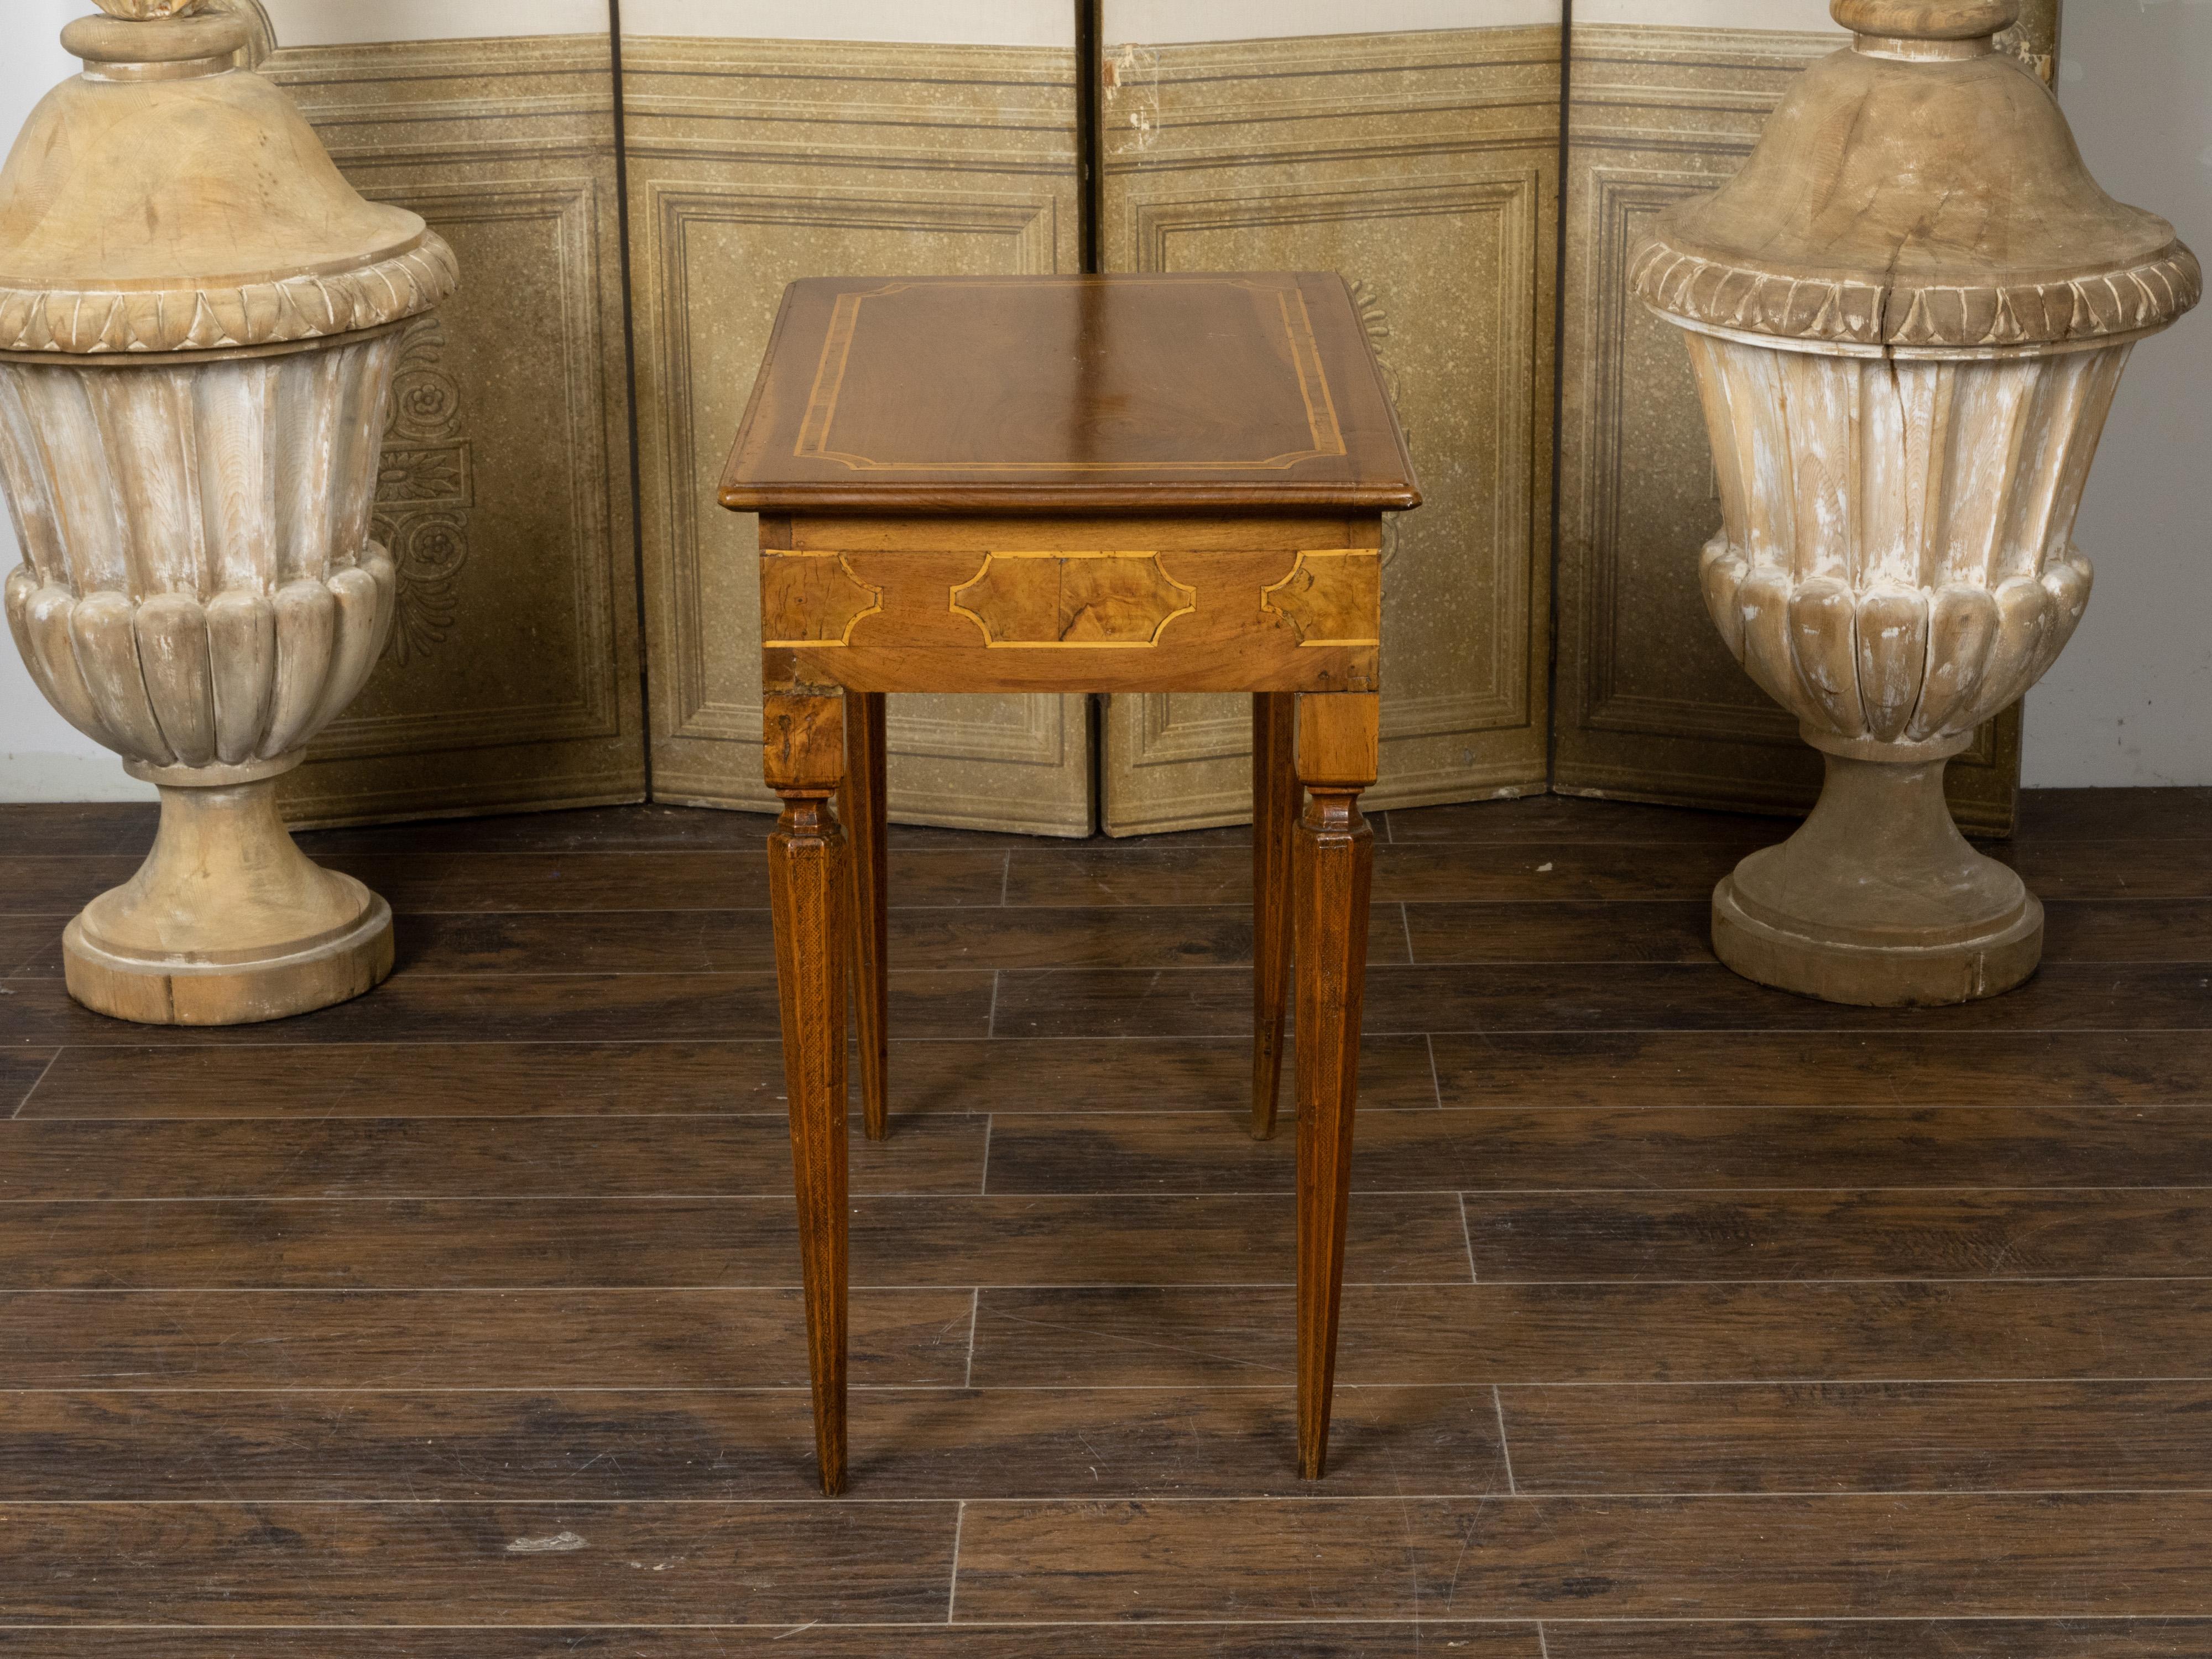 Italian Neoclassical Period 18th Century Walnut Console Table with Cross Banding For Sale 1